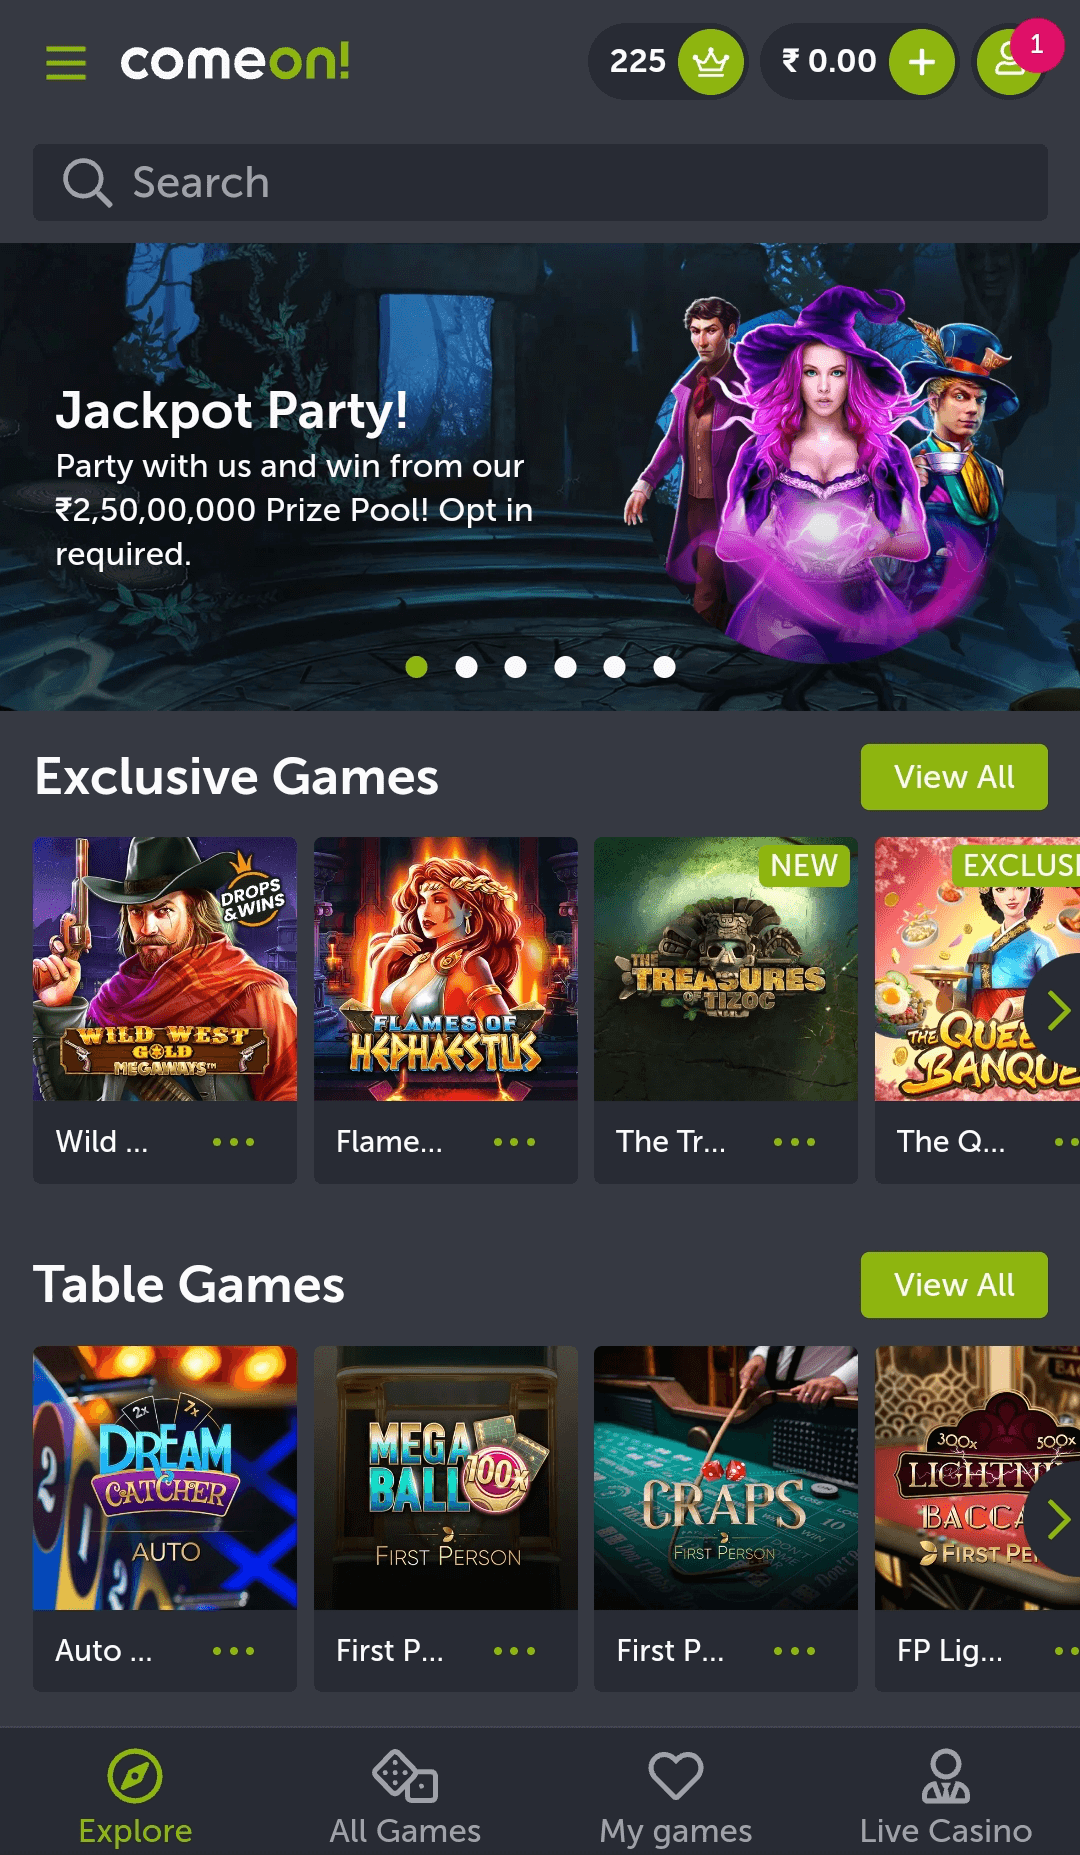 Casino section in the ComeOn app